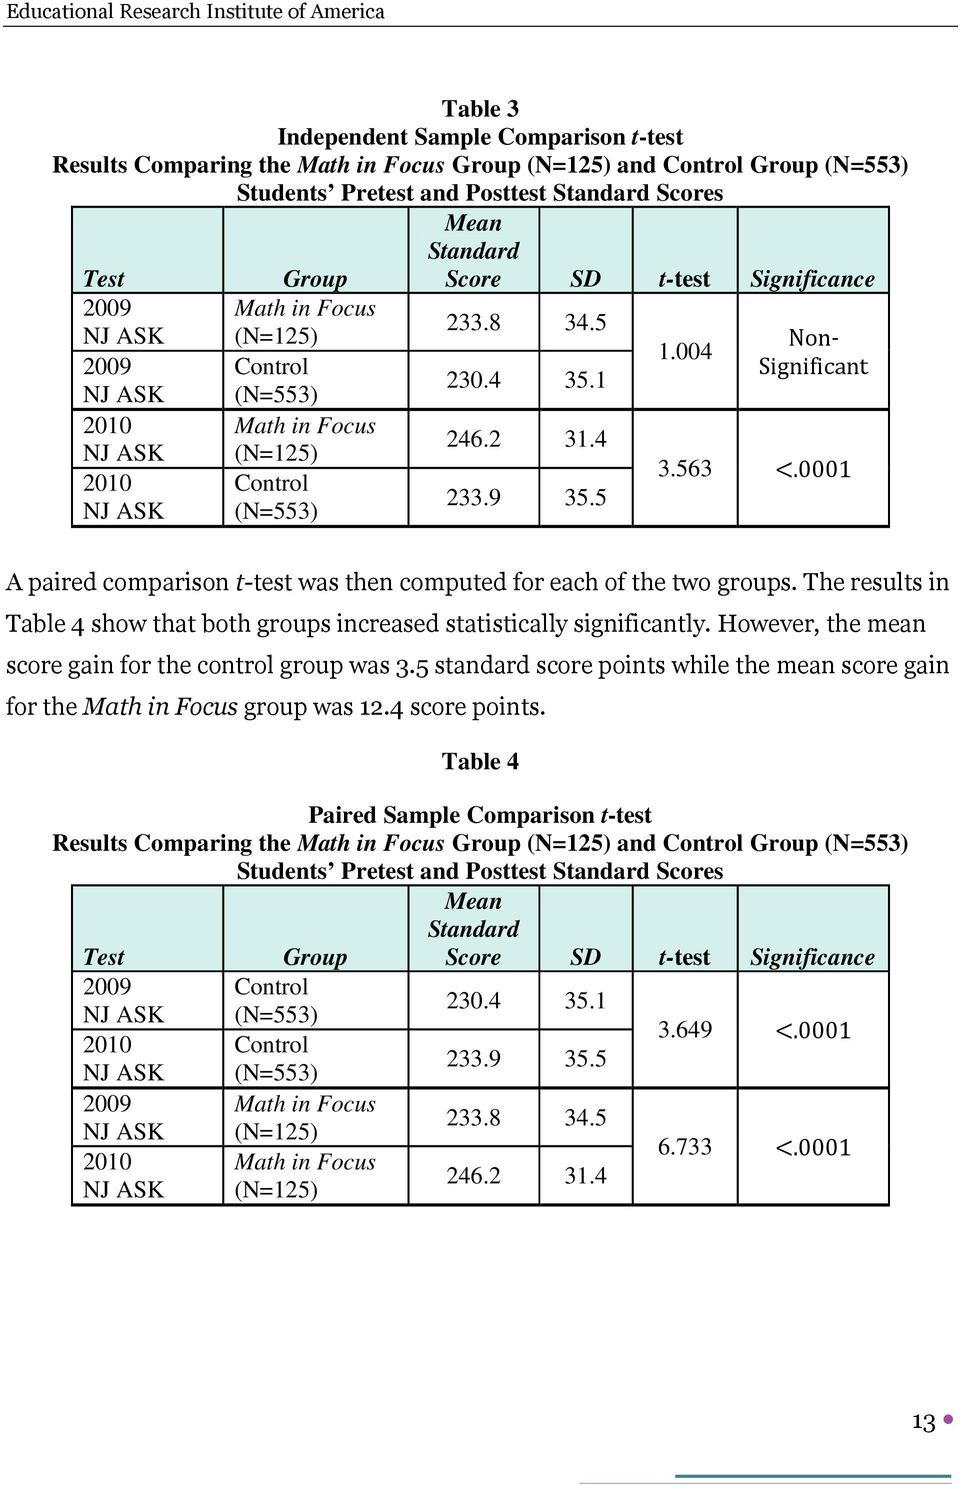 0001 A paired comparison t-test was then computed for each of the two groups. The results in Table 4 show that both groups increased statistically significantly.